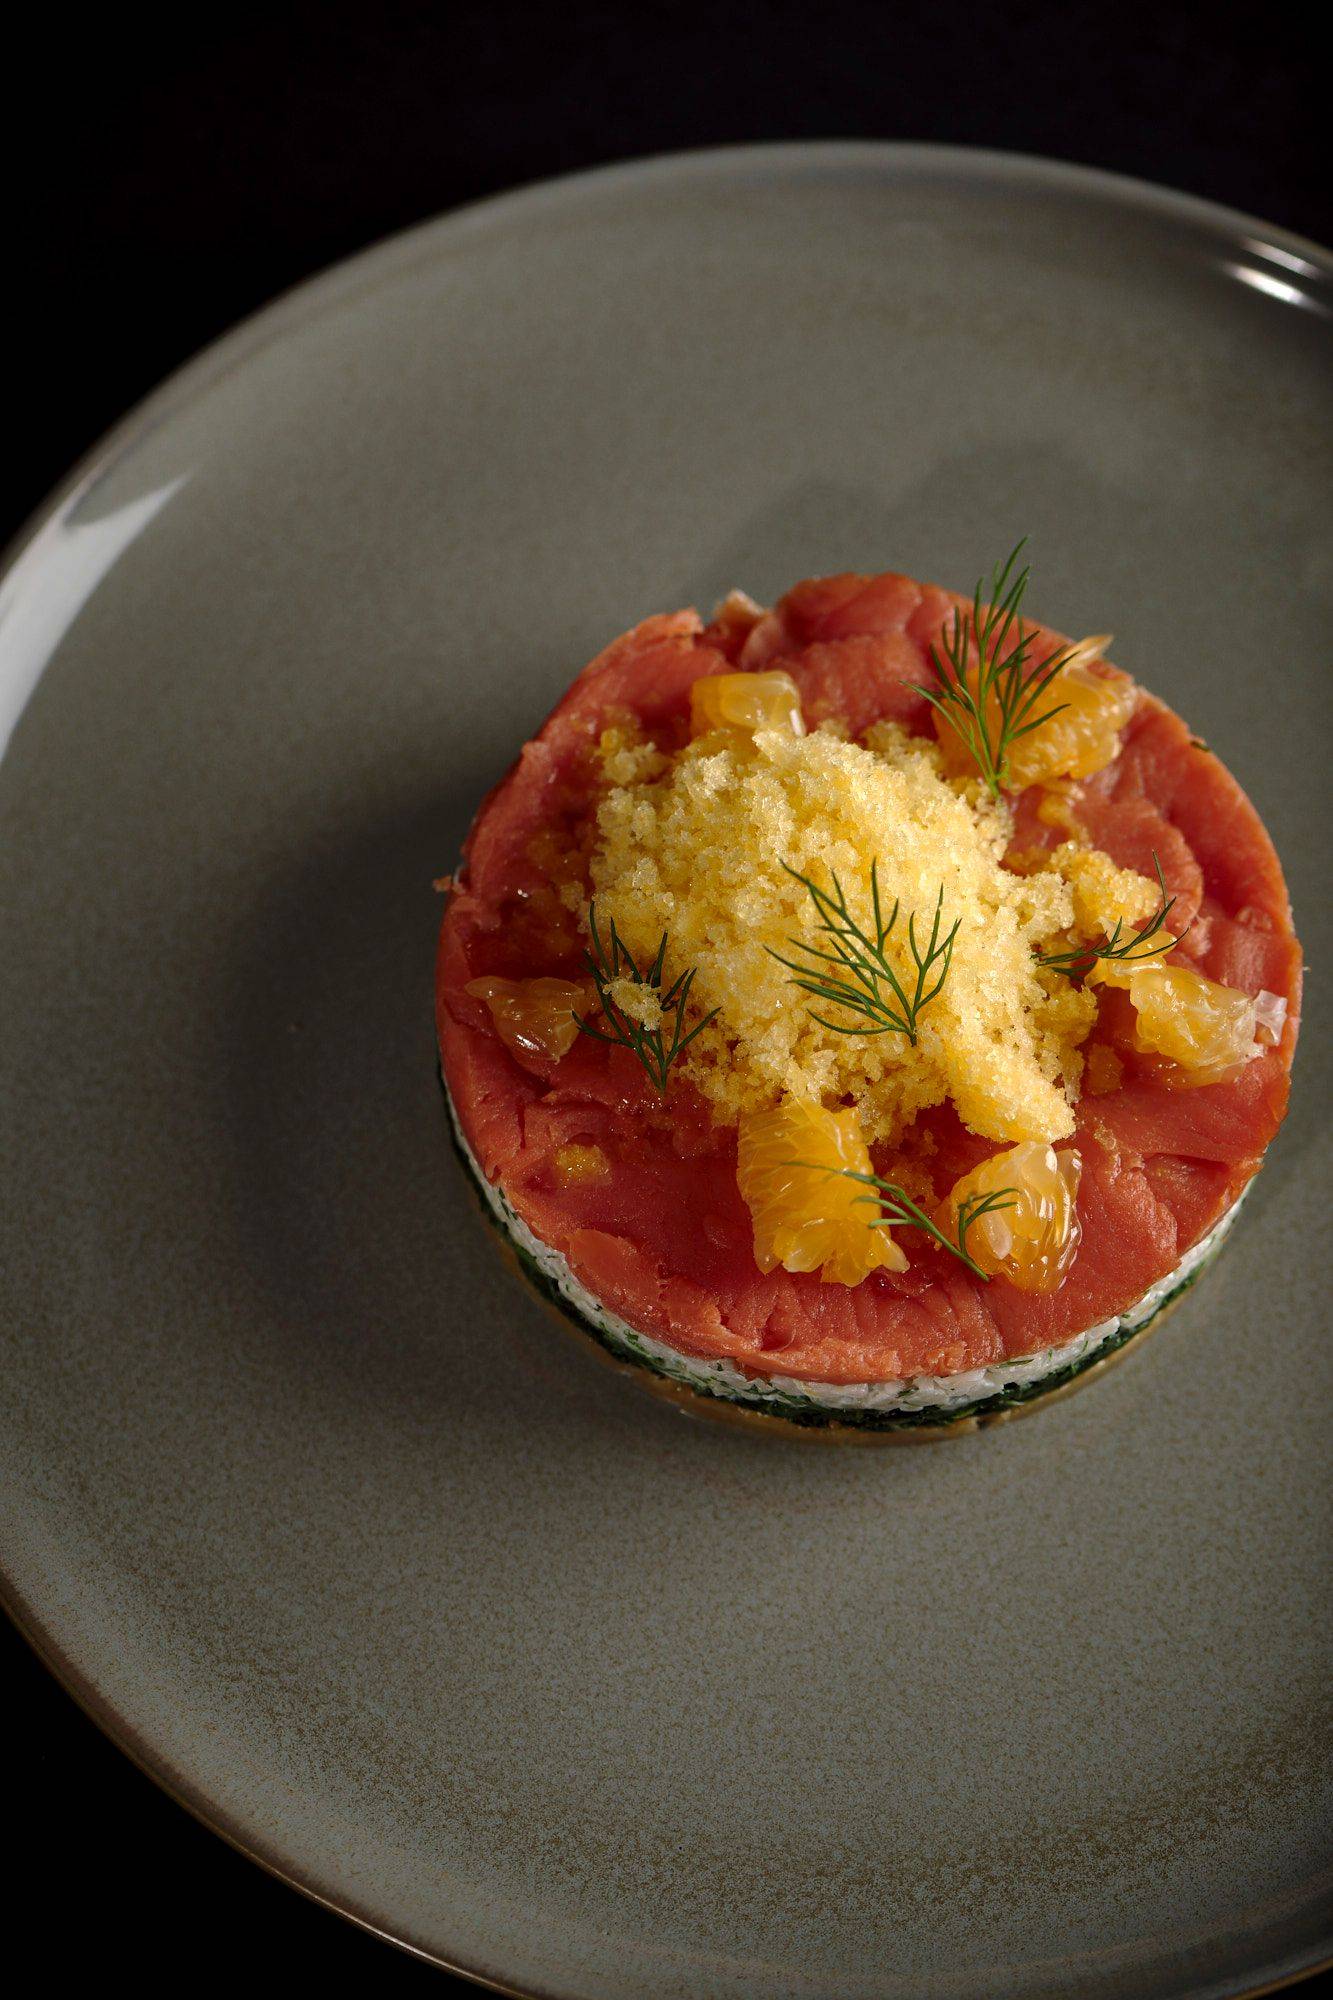 cured salmon tart with tangerine granita on a gray plate with black background